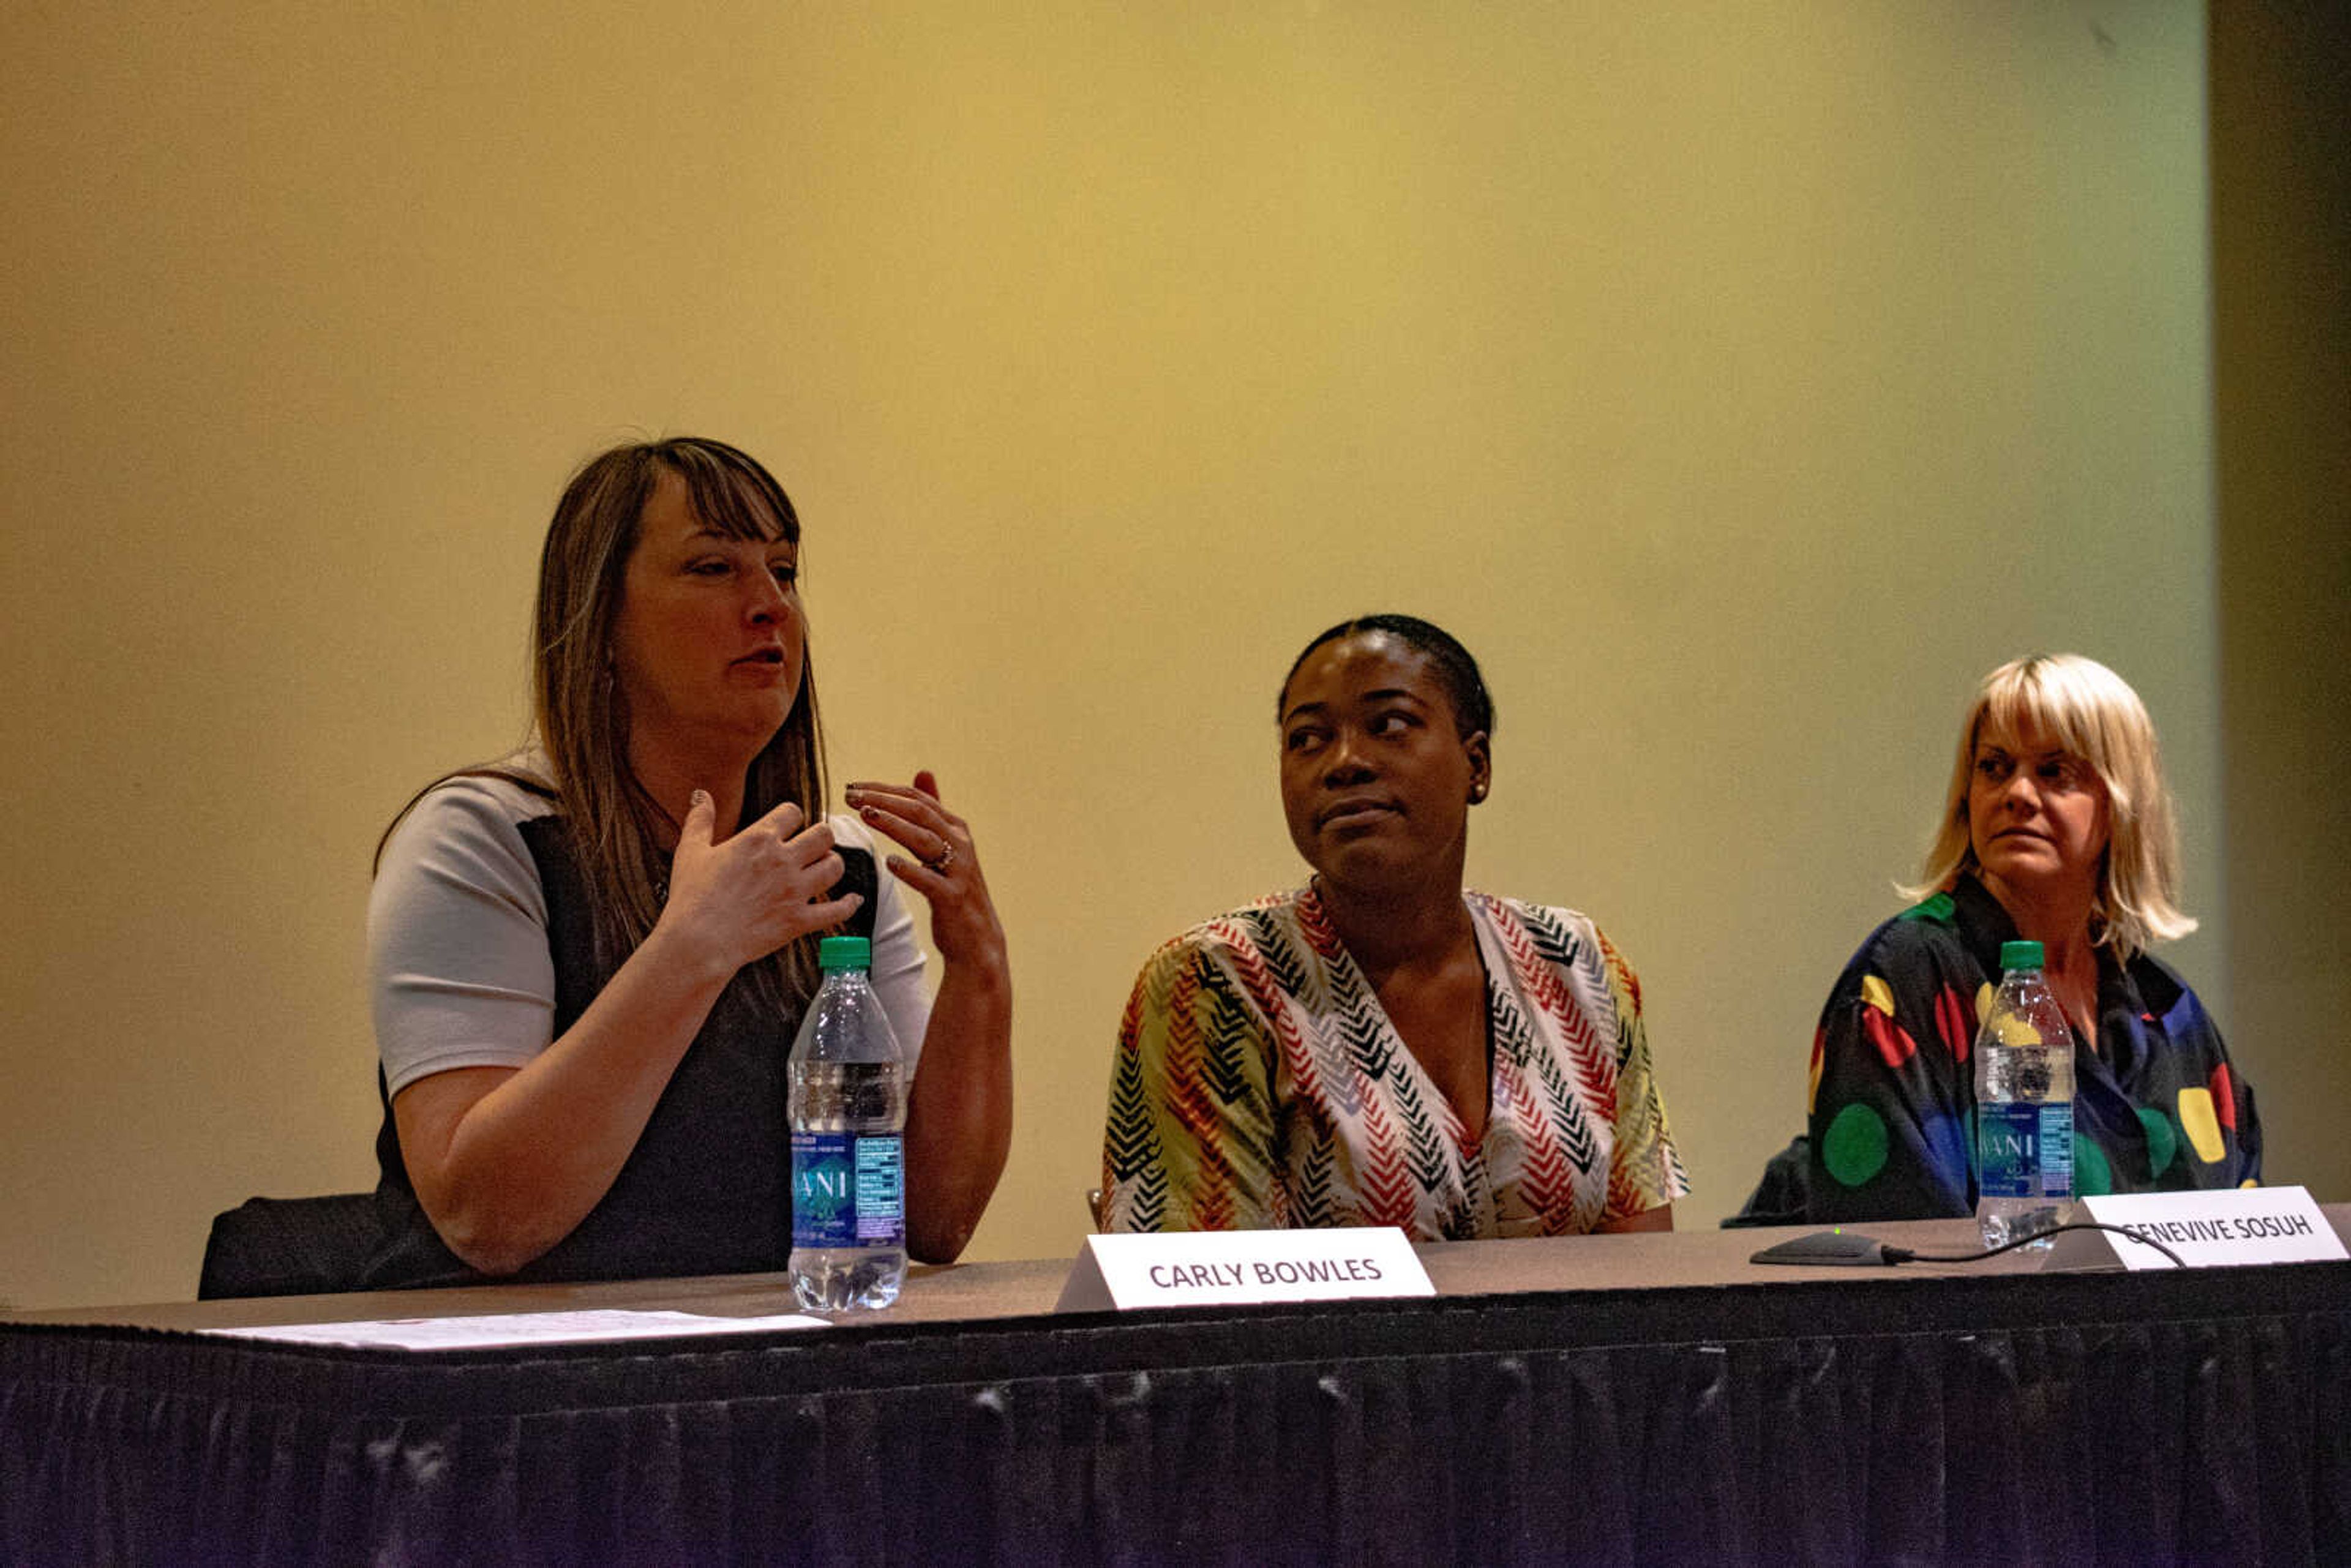 CPA and member of Cape Girardeau Chamber of Commerce Carly Bowles (left) recounting her rise as an individual professional while panelists Genevive Sosuh (middle) and Laurie Everett (right) listen attentively, Oct. 22, 2019 in Glenn Auditorium at Southeast Missouri State, University Cape Girardeau, Missouri.